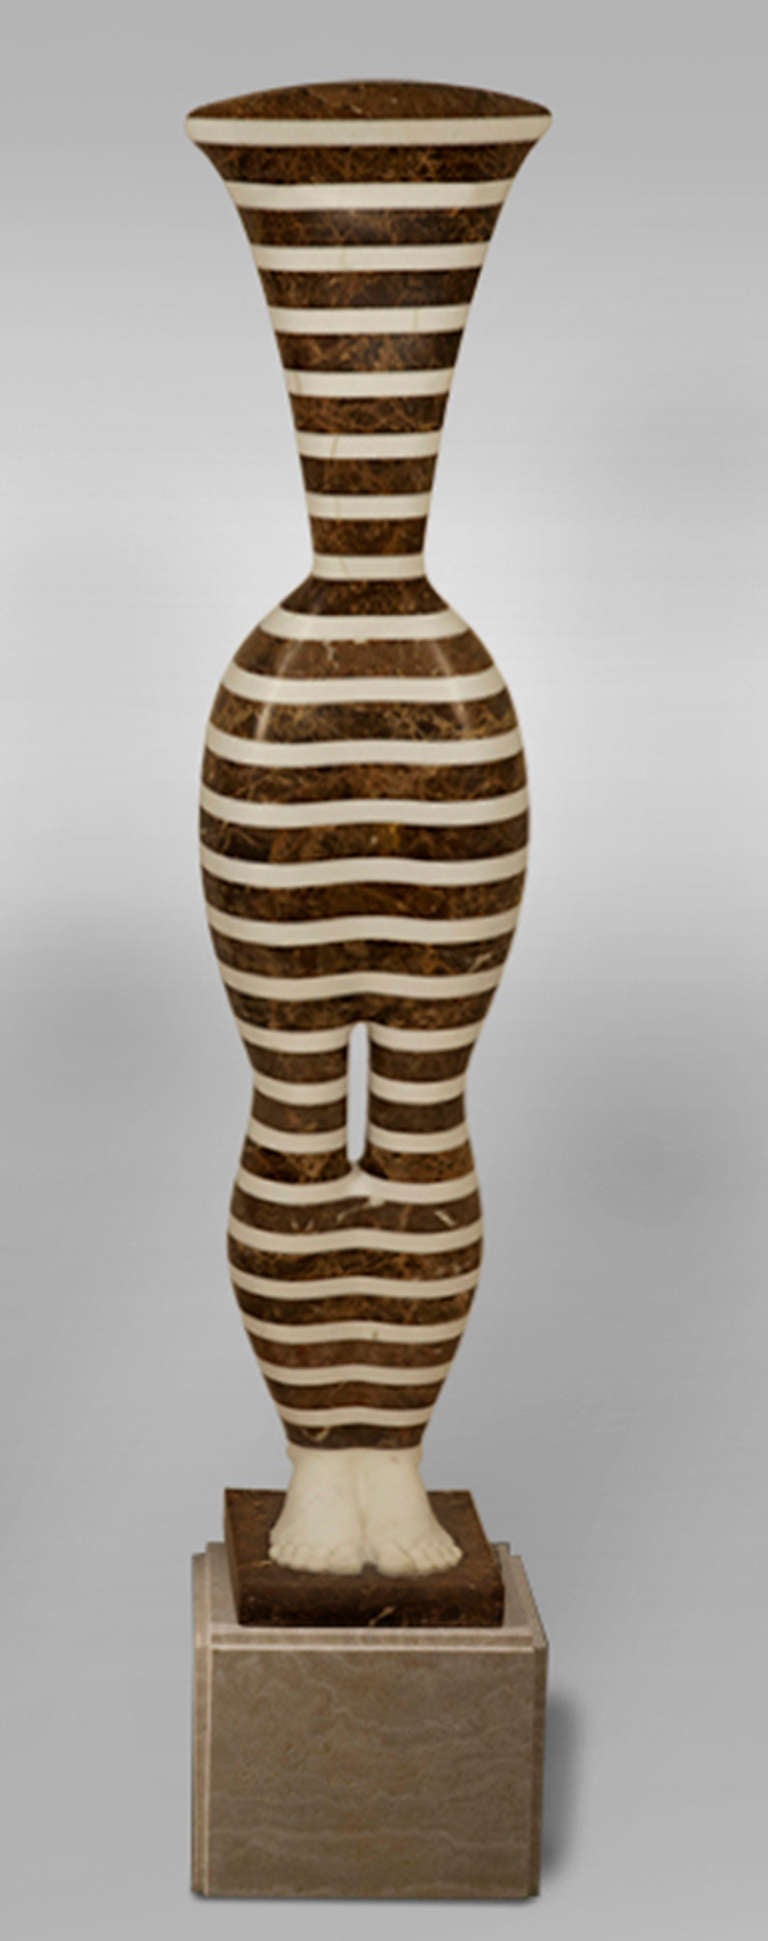 Striped Kore, 2012 by Laszlo Taubert (Hungarian, b. 1966).
in alternating slabs of cut-and-polished white Portuguese marble and brown limestone. Comes with limestone pedestal (overall height: 65.5 inches)
Measures: 55.5" H x 12.0" W x